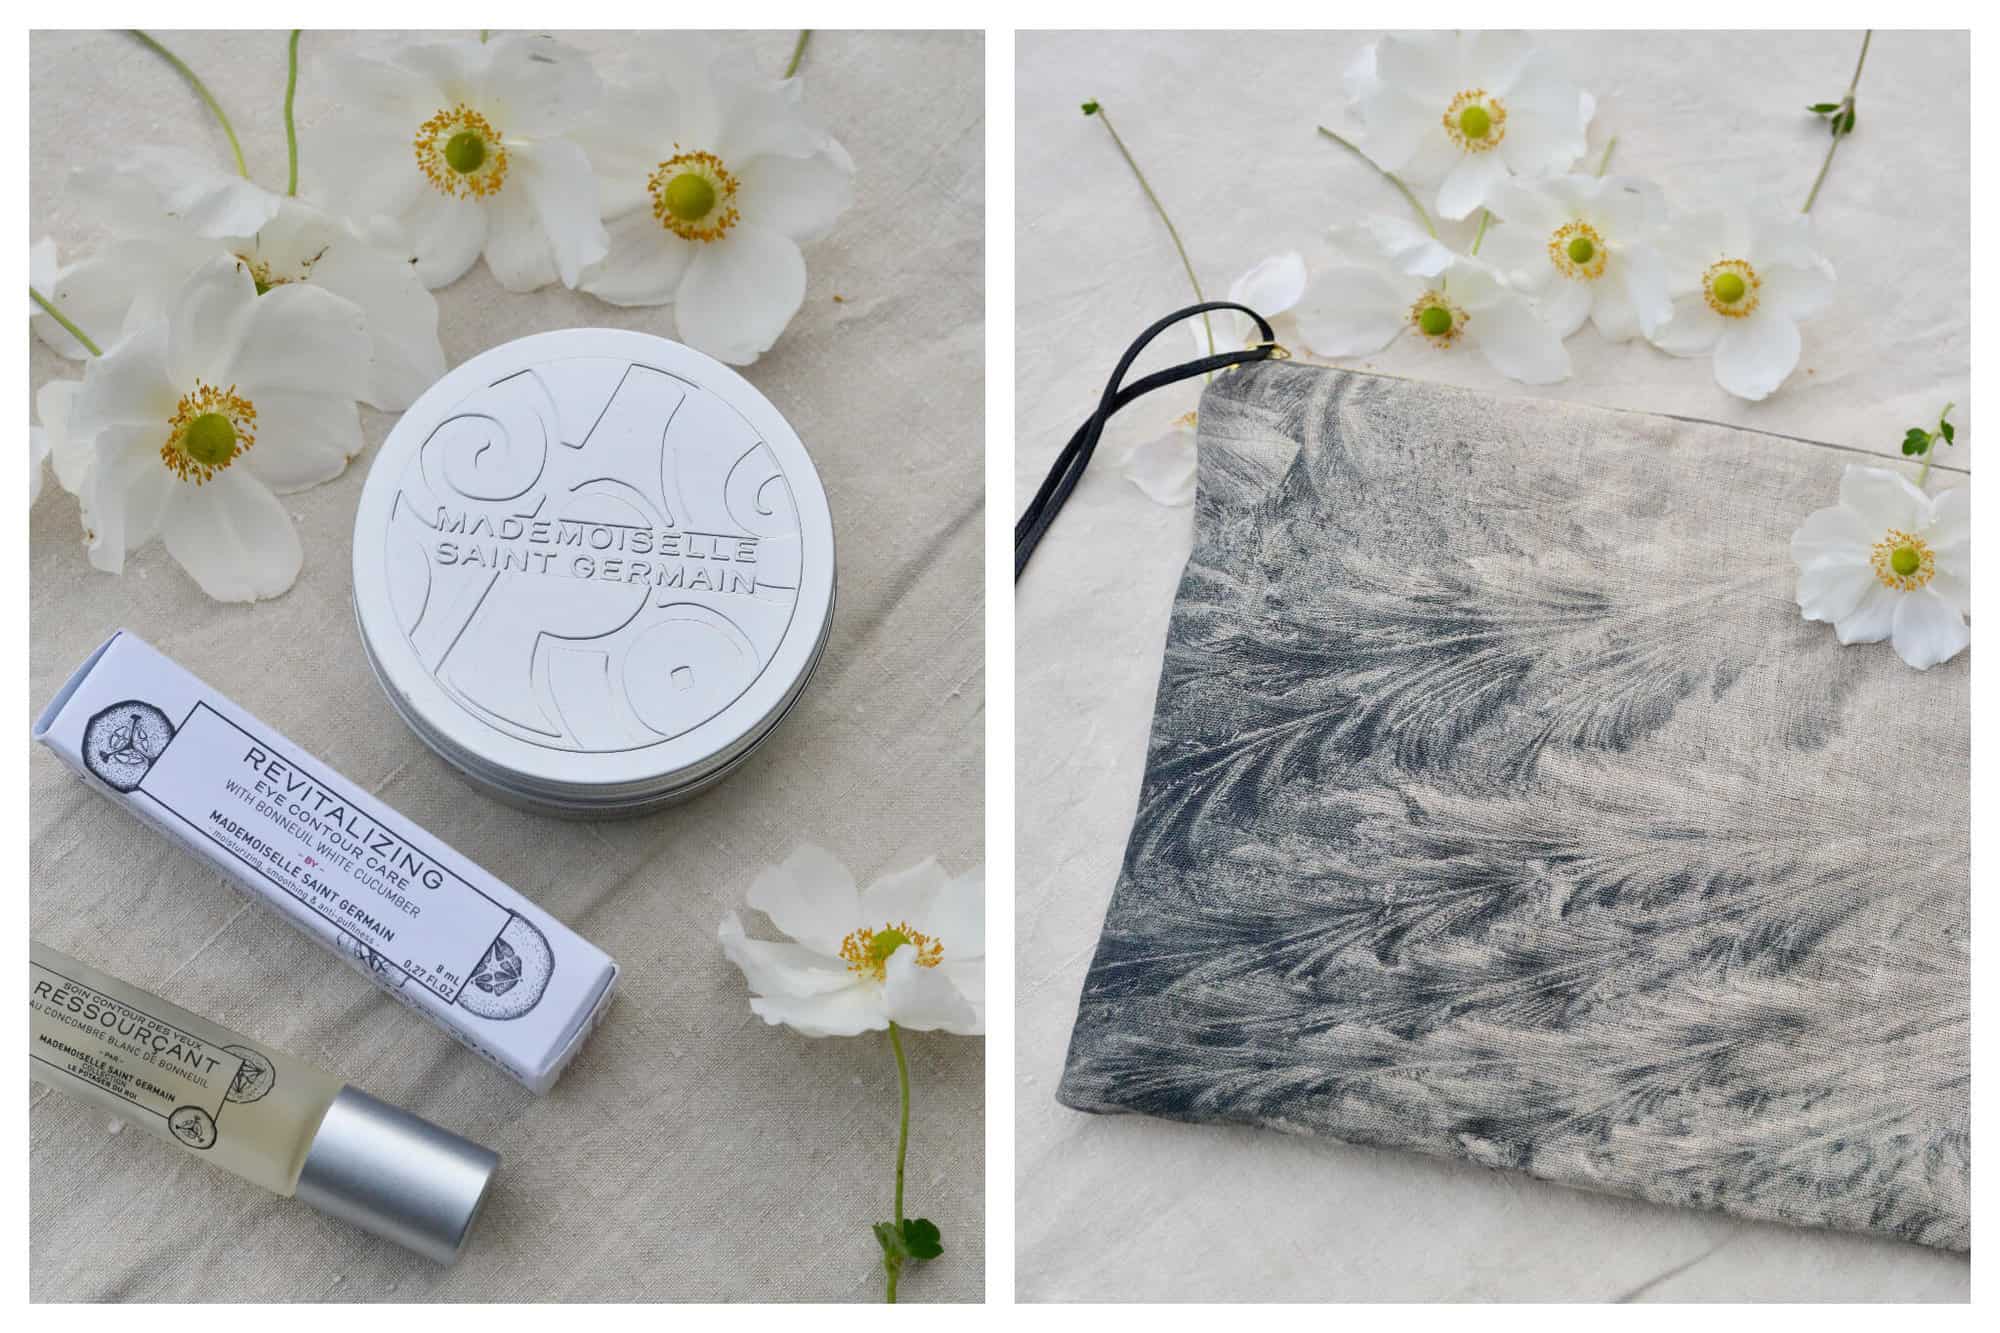 Left: an aerial view of some beauty products on a cream linen sheet with white and yellow flowers on it. There is a silver tin and a bottle of perfume as well as a product for the eyes. Right: a blue, gray, and cream pouch on a cream linen sheet. There are white and yellow flowers on it.